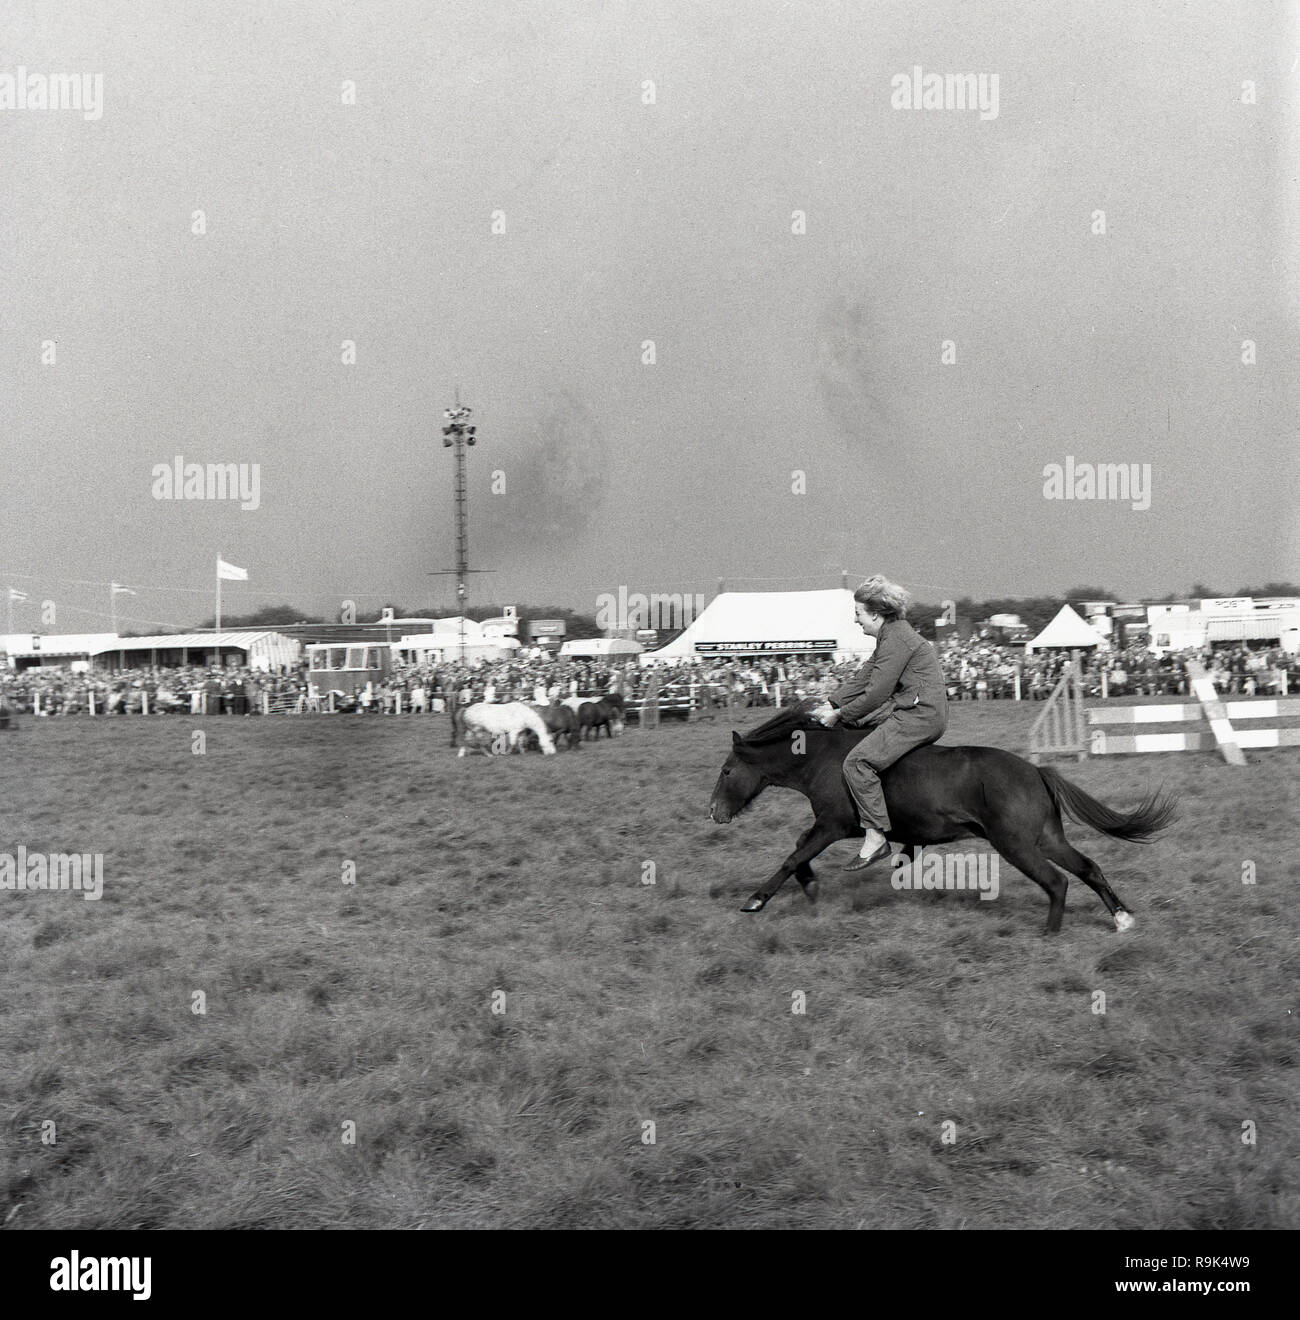 1967, Thame Show, Oxfordshire, a lady riding a small horse bareback, without a saddle or harness, holding on to the horse's mane, England, UK. The show is the largest one-day agricultural show in Britain and the although the first official event was held in 1888, it's origins date back to 1855 when a ploughing competition was held there. Stock Photo